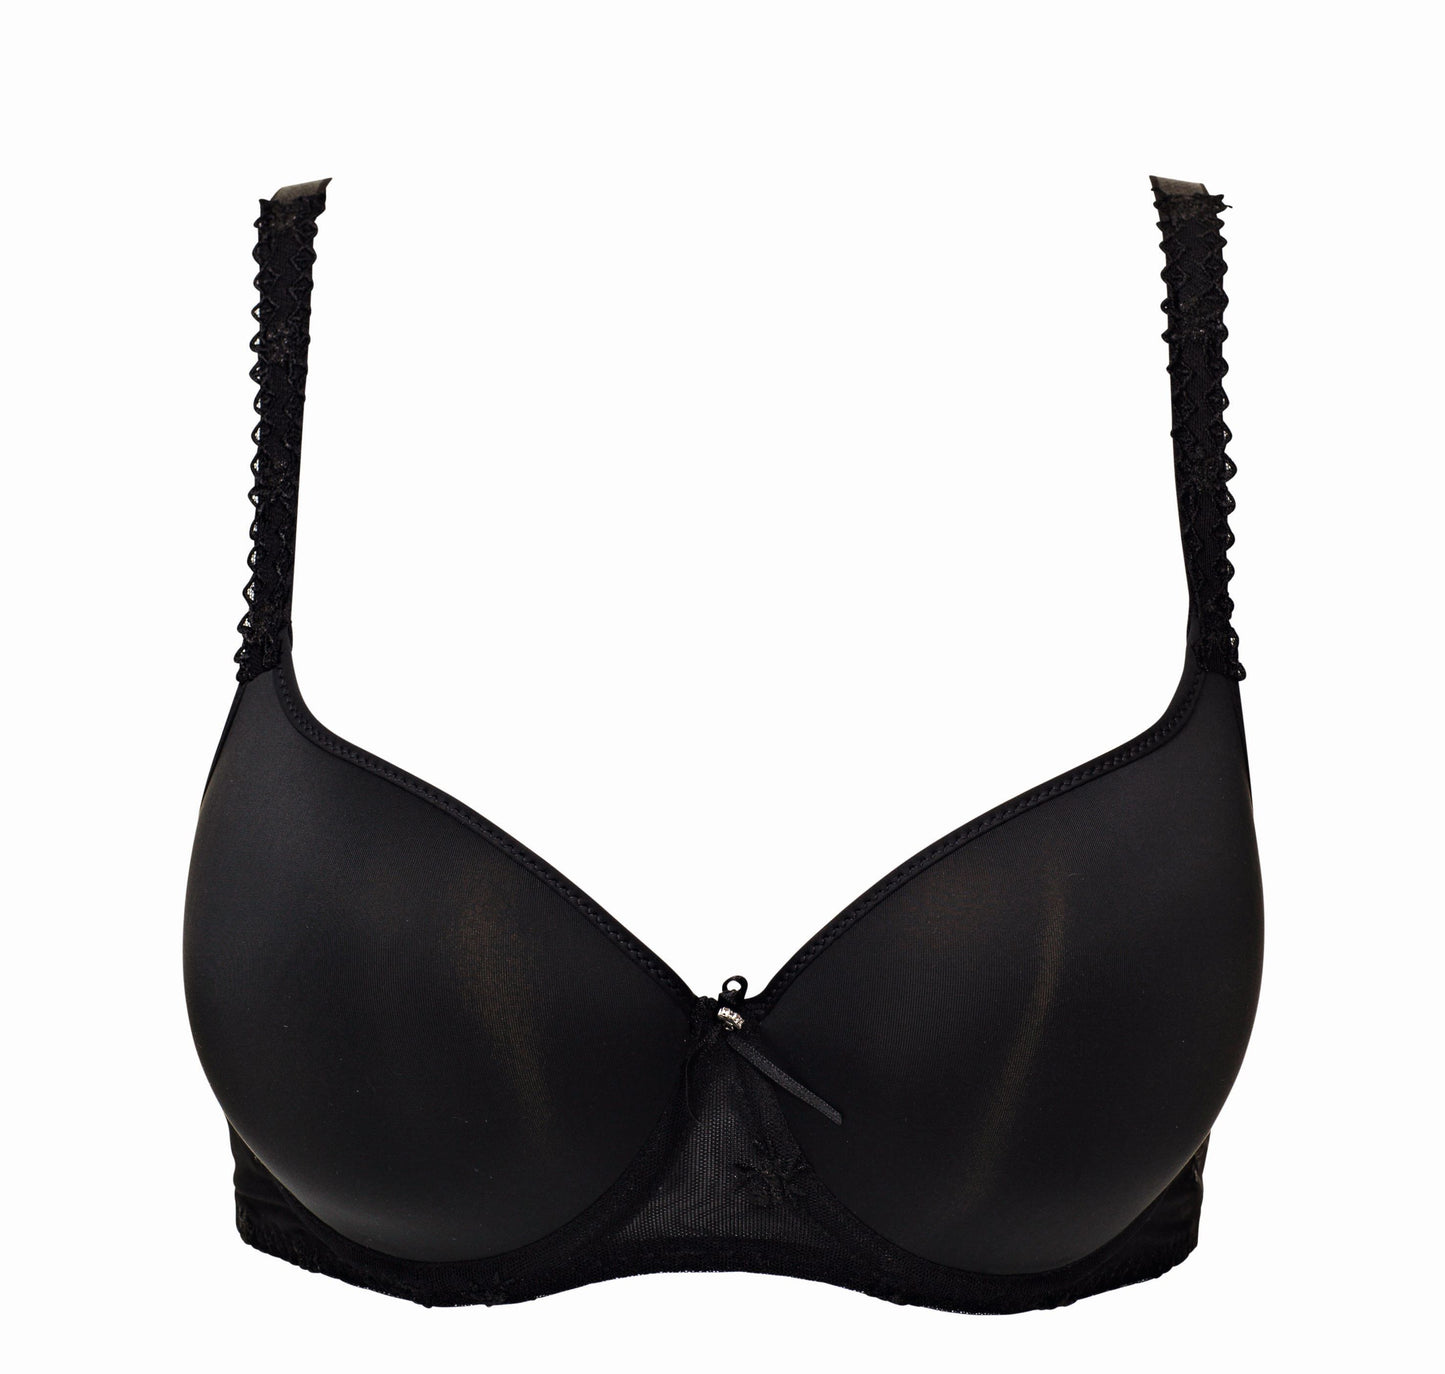 Black Louisa Bracq padded bra from the Chantilly line features iridescent medallions on the front frame, with a minimalist design intended to provide an invisible look.